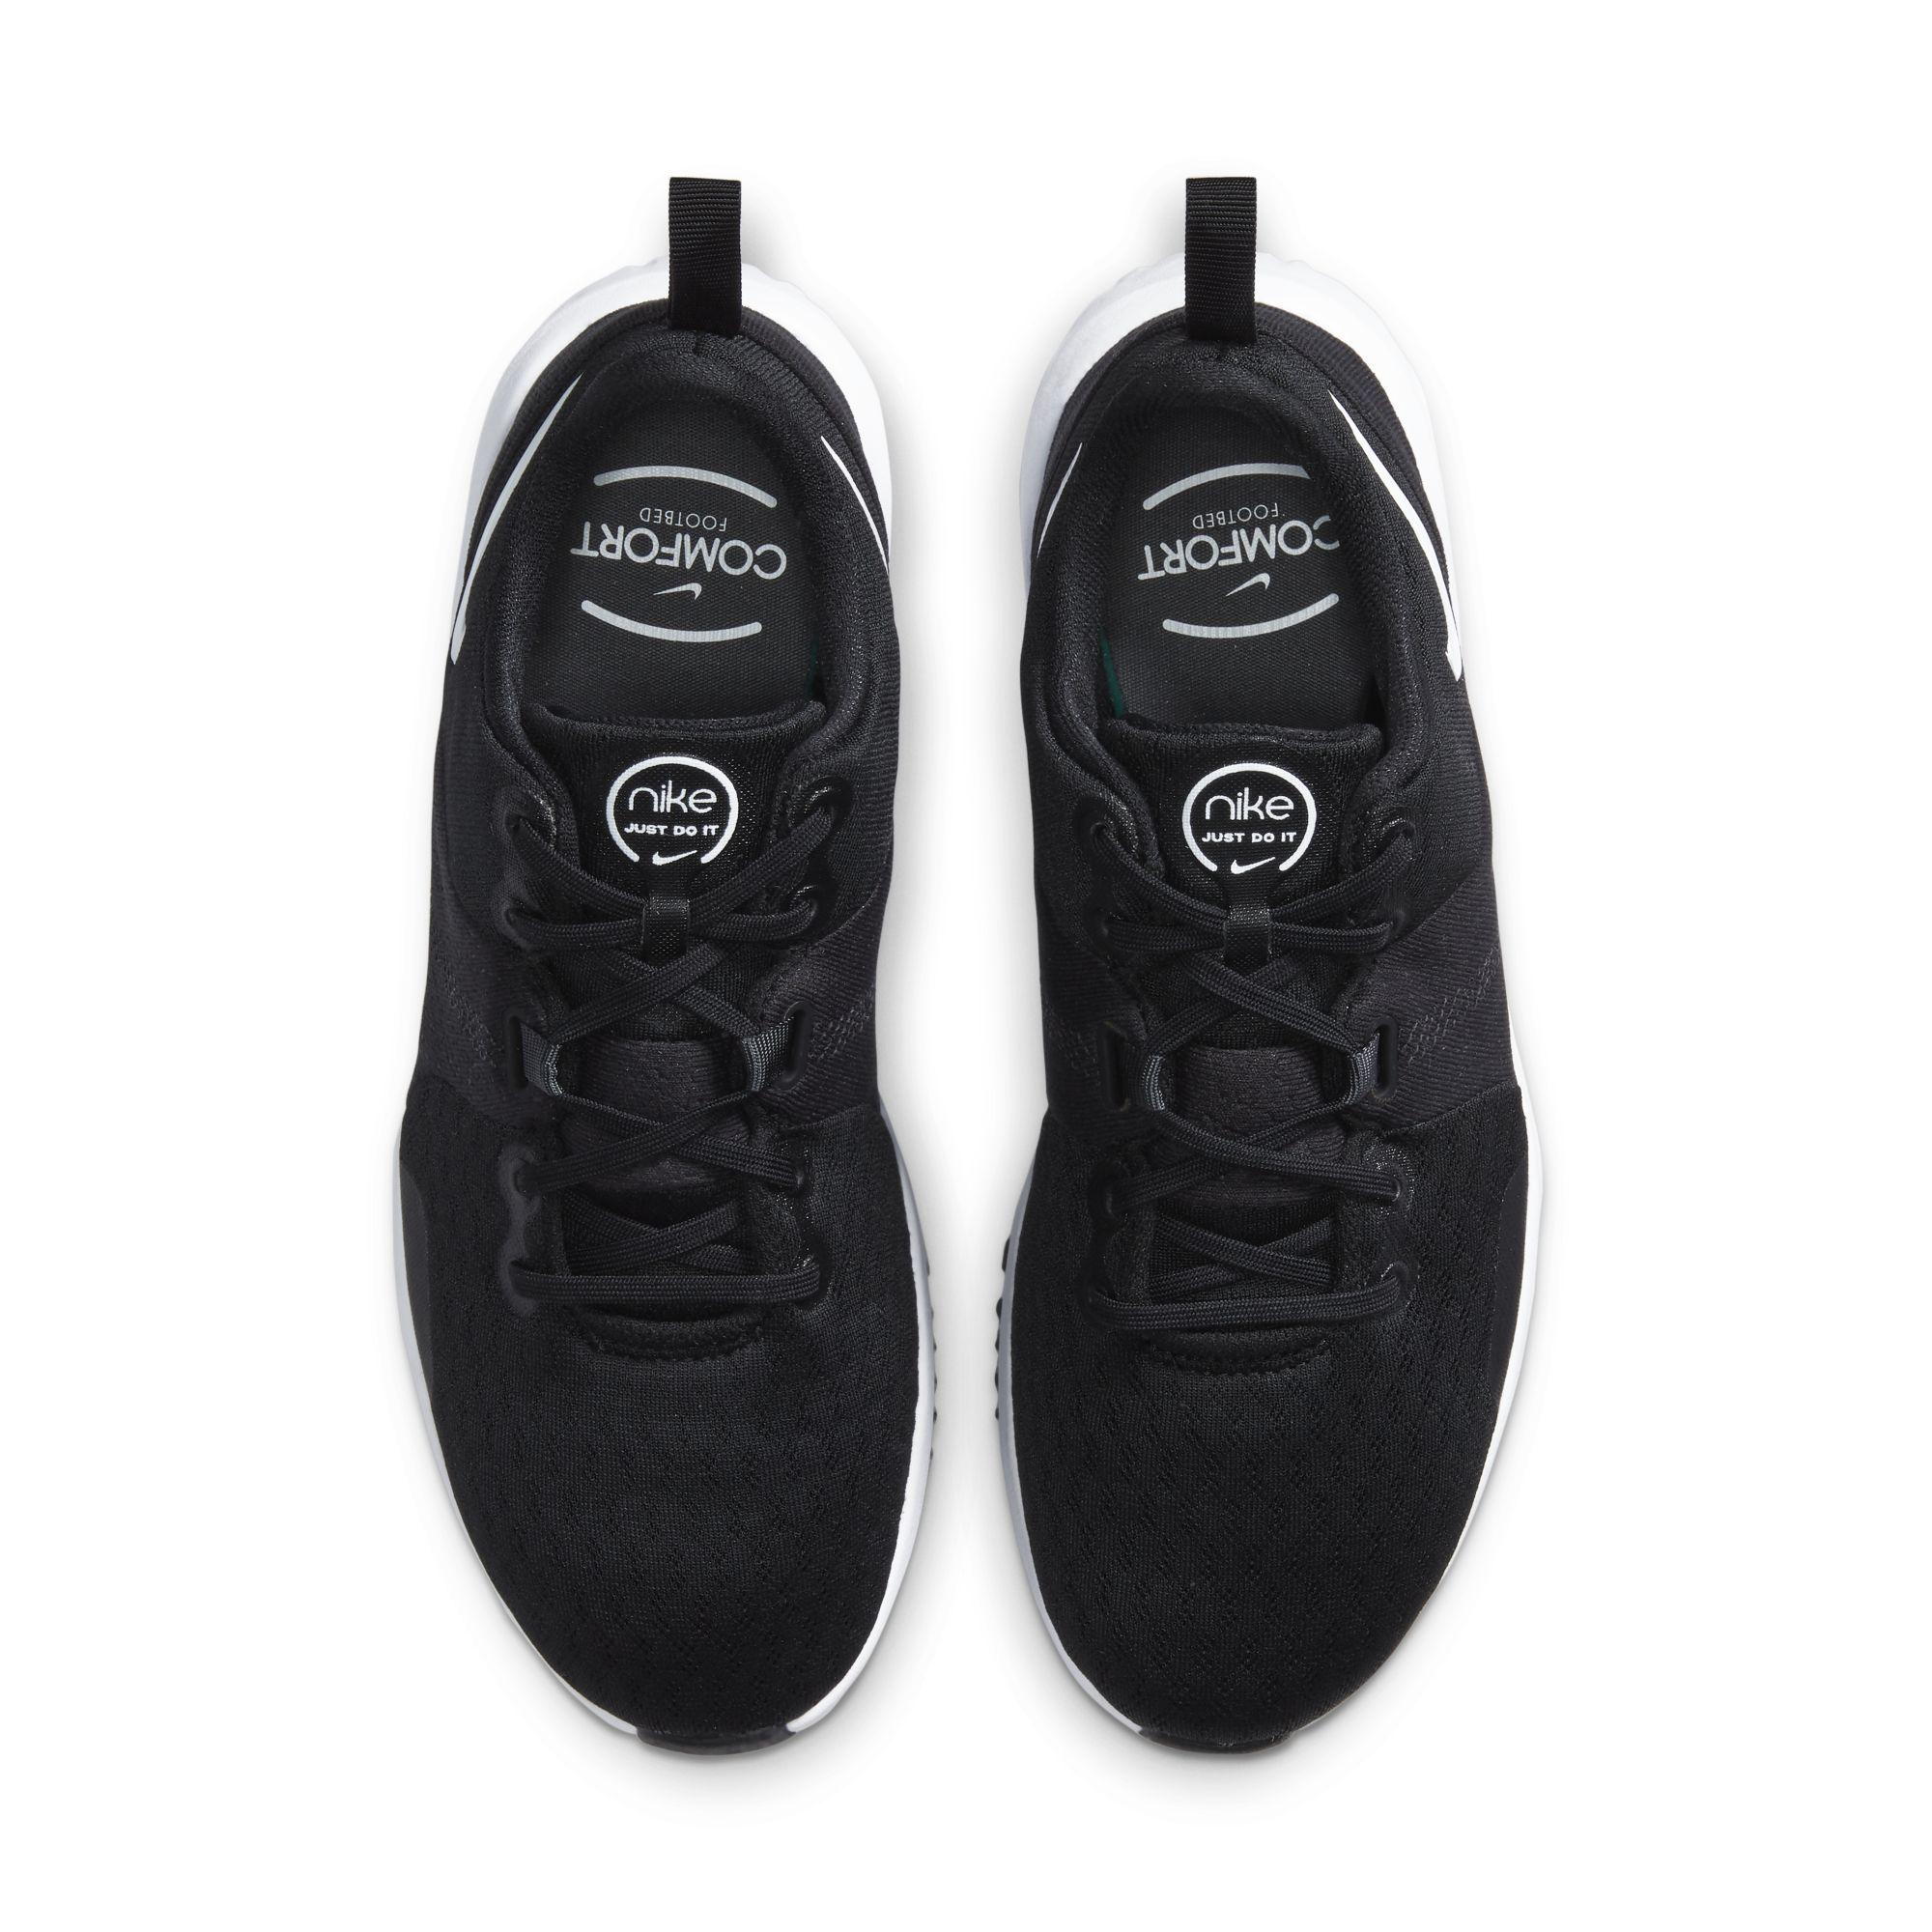 Nike Synthetic City Trainer 2 in Black | Lyst Australia